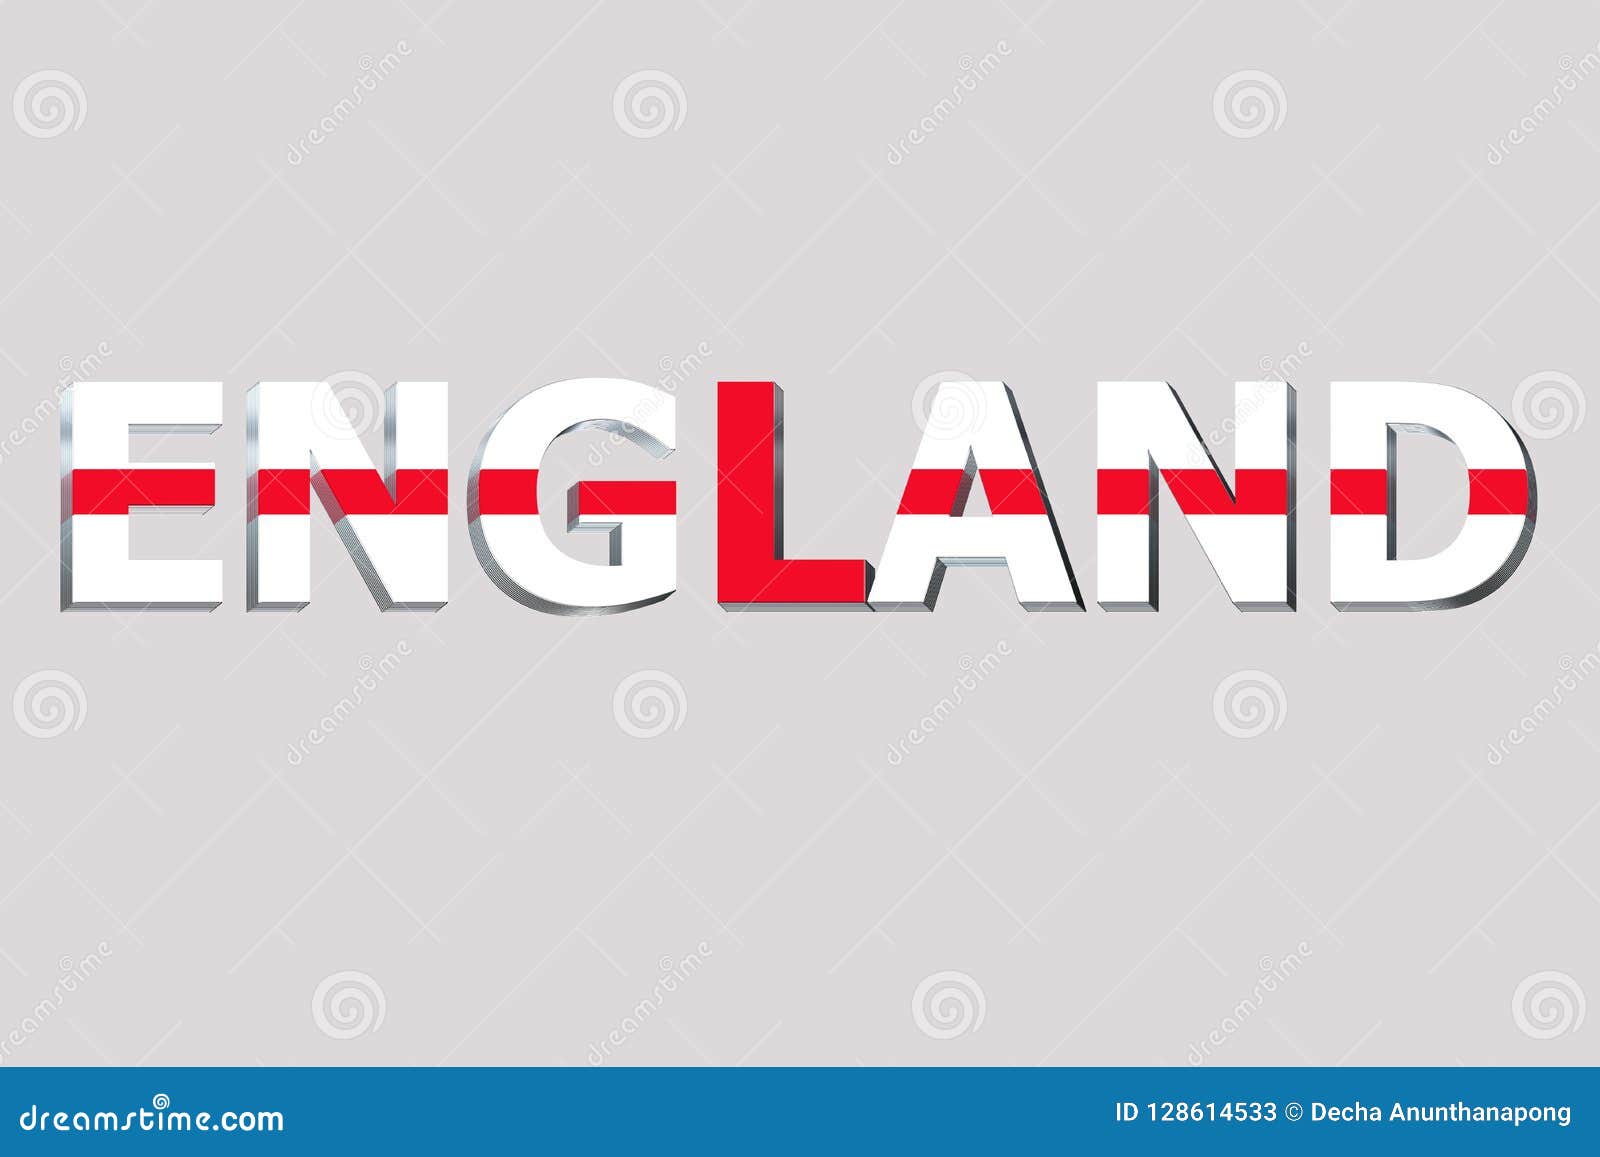 Flag of England on text stock illustration. Illustration of text ...